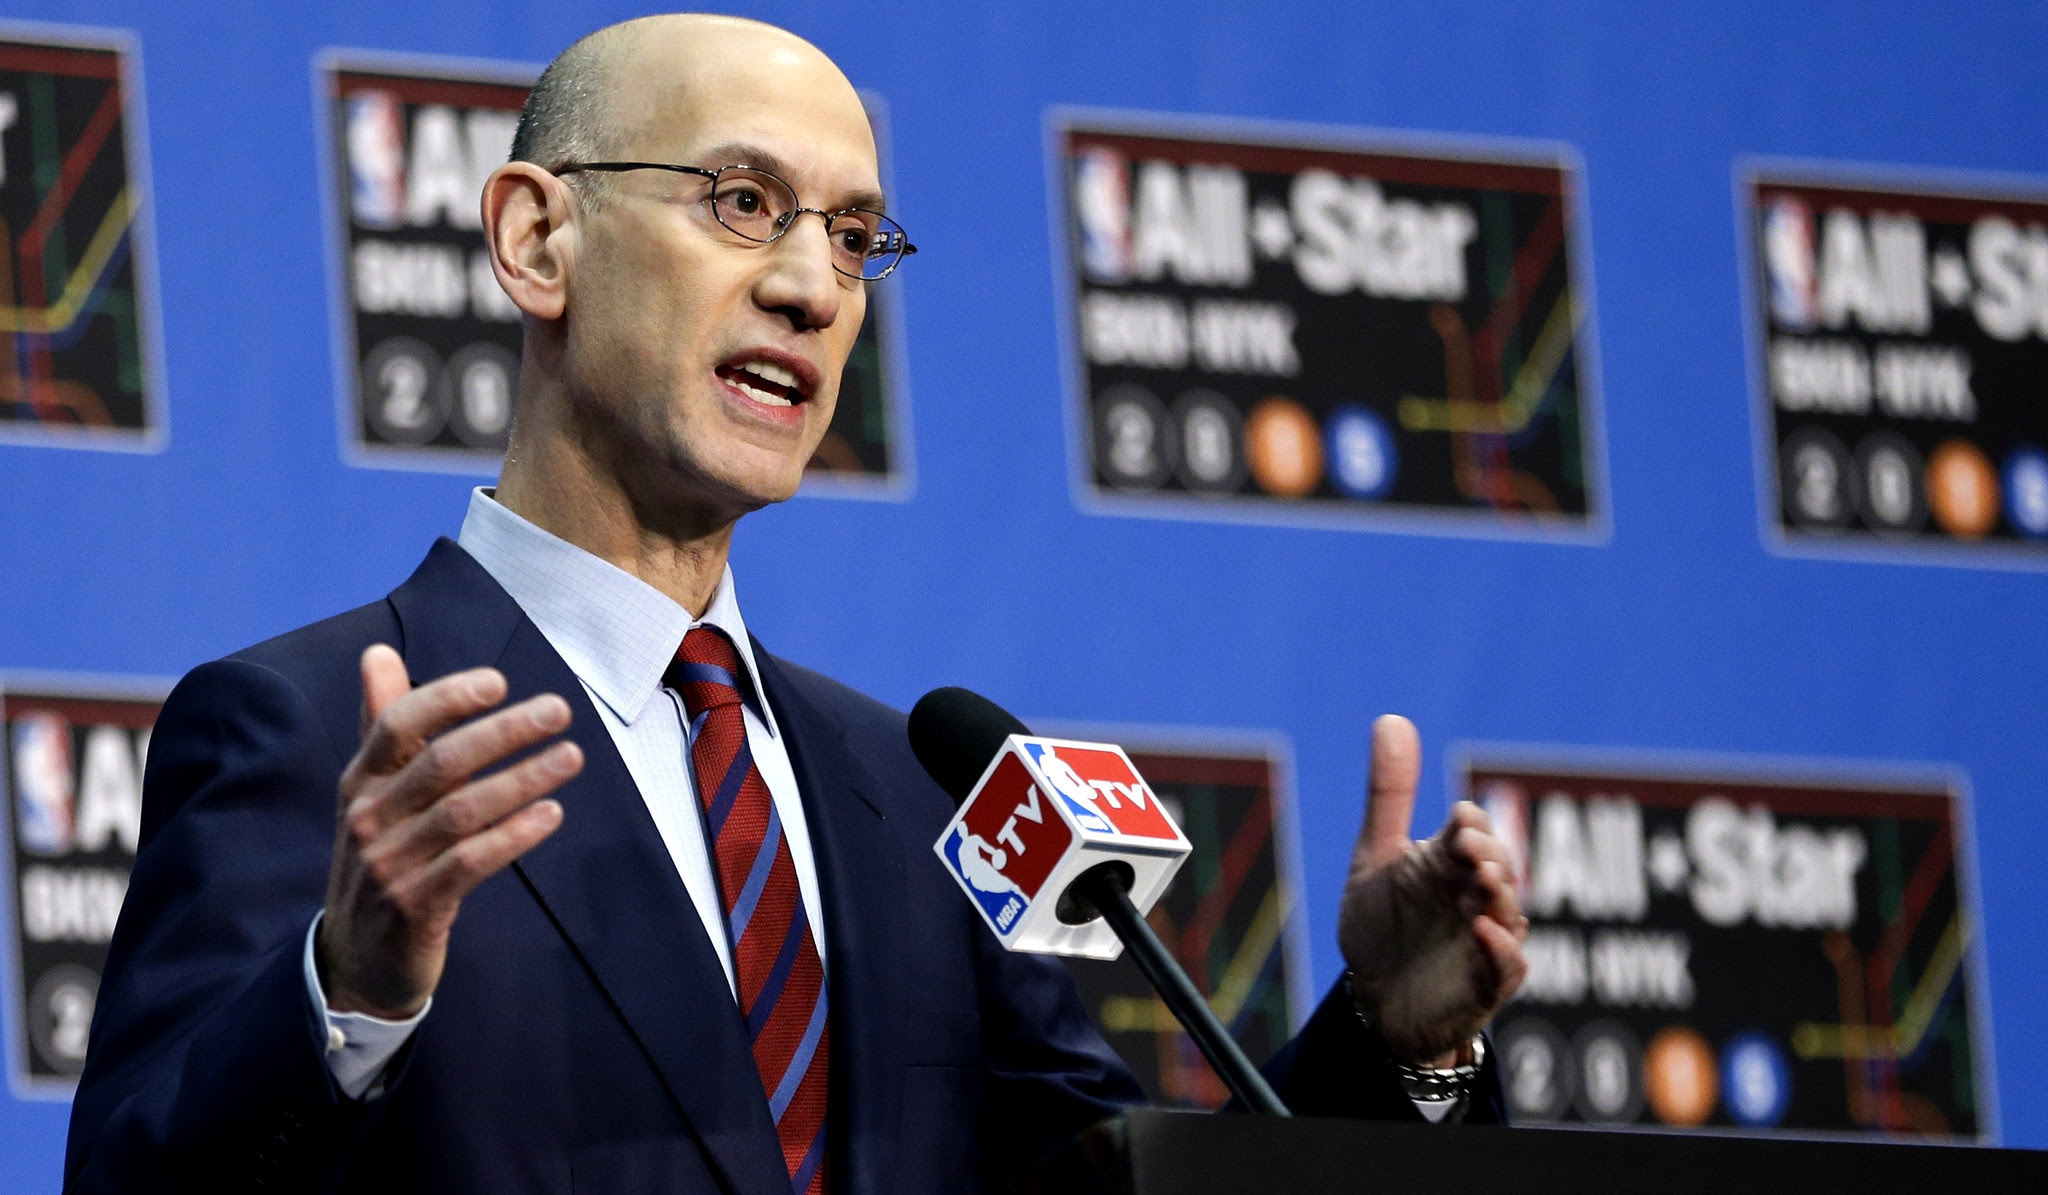 Adam Silver says he'll look into restructuring NBA playoffs